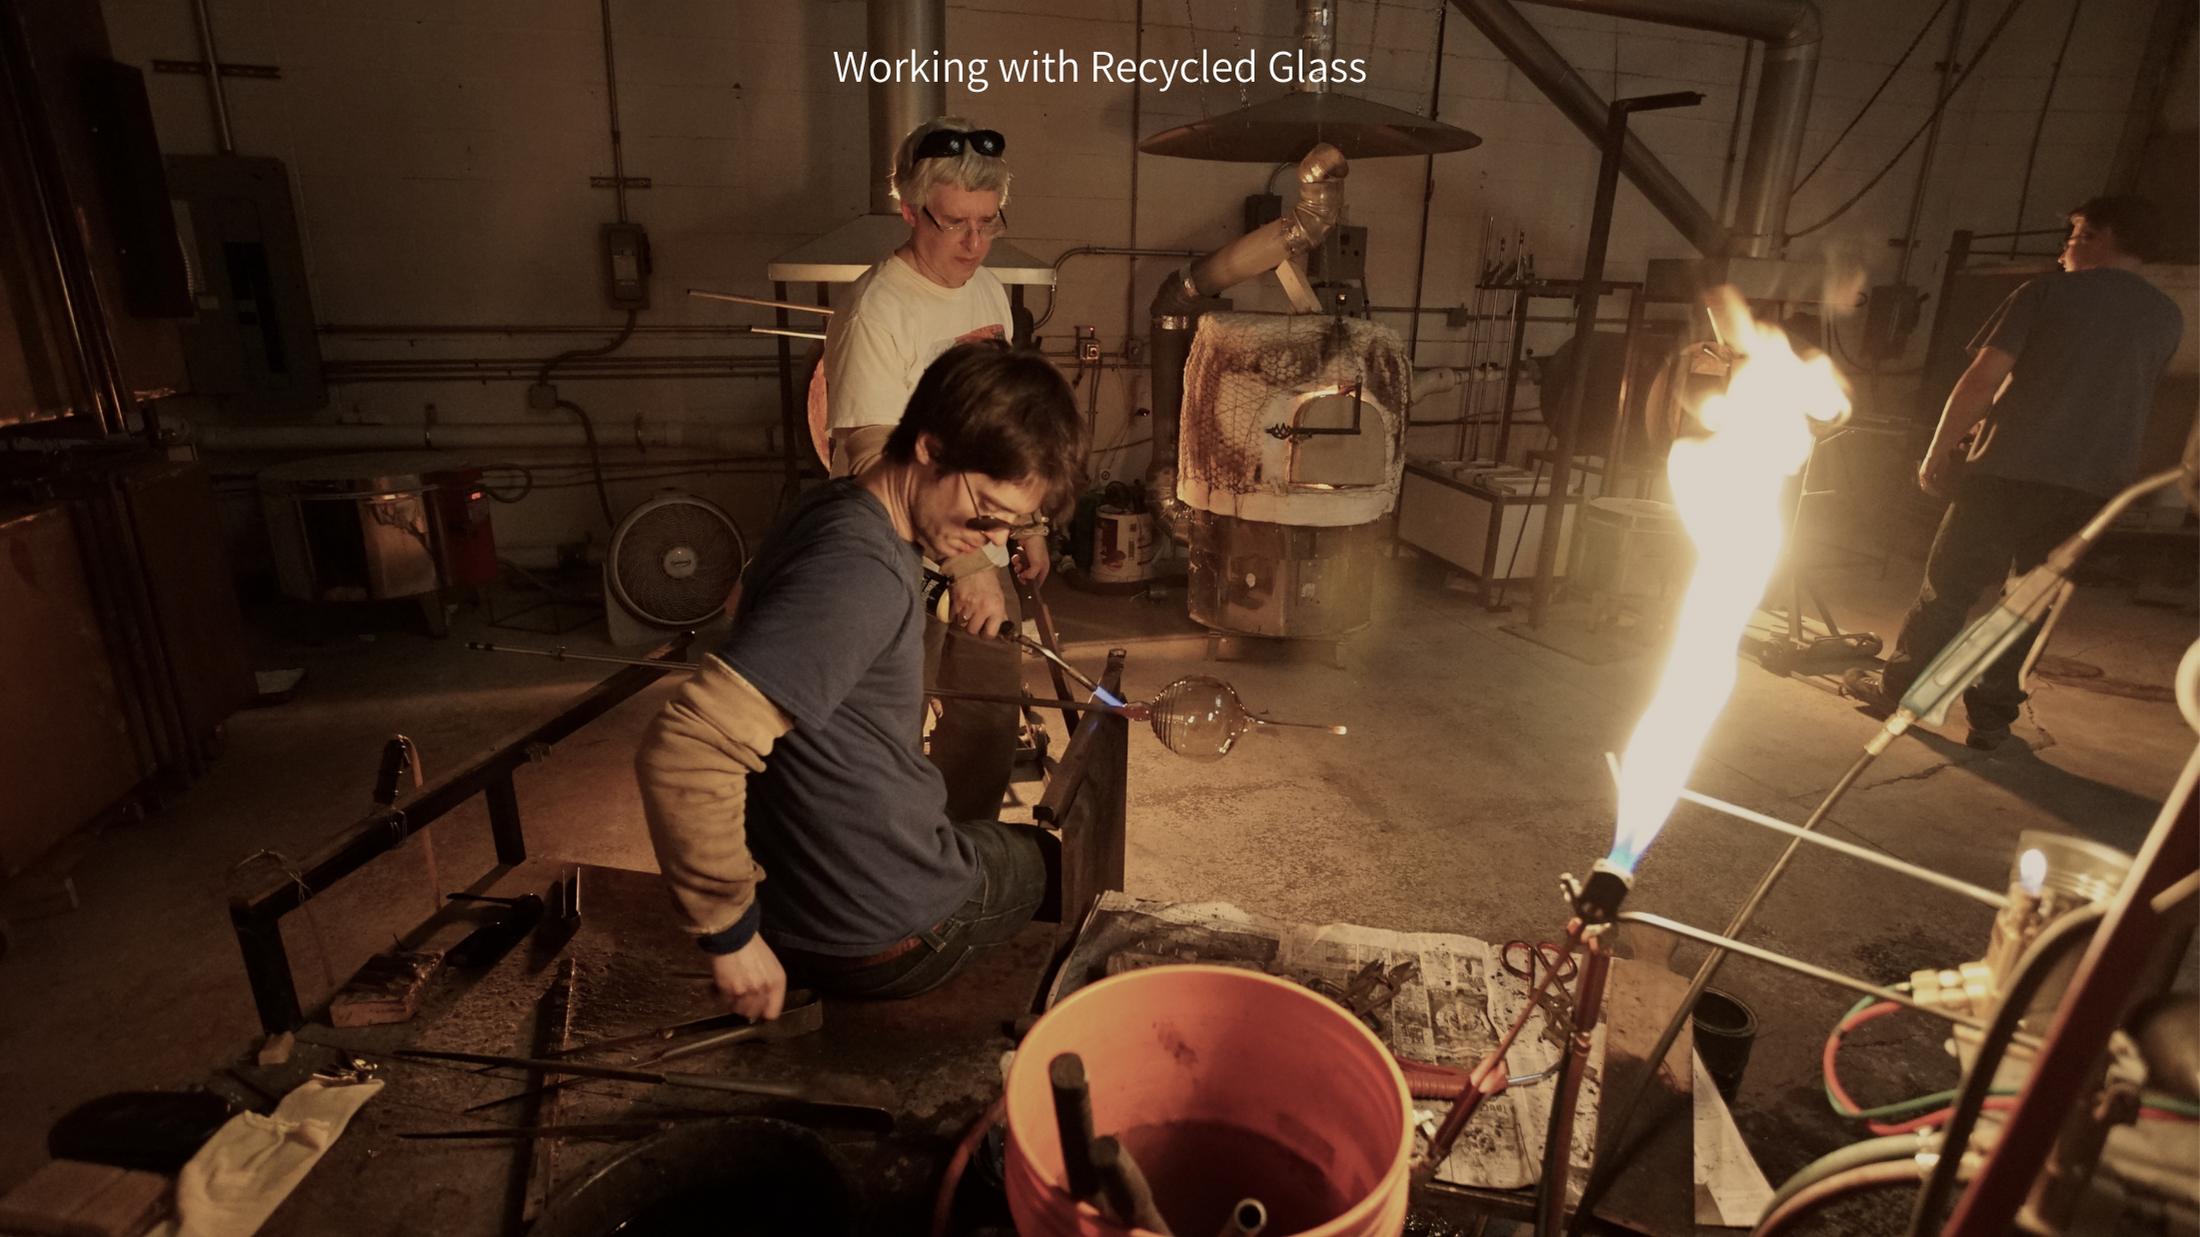 Load video: Michael and David talk about the challenges and rewards of working with sustainably sourced glass.